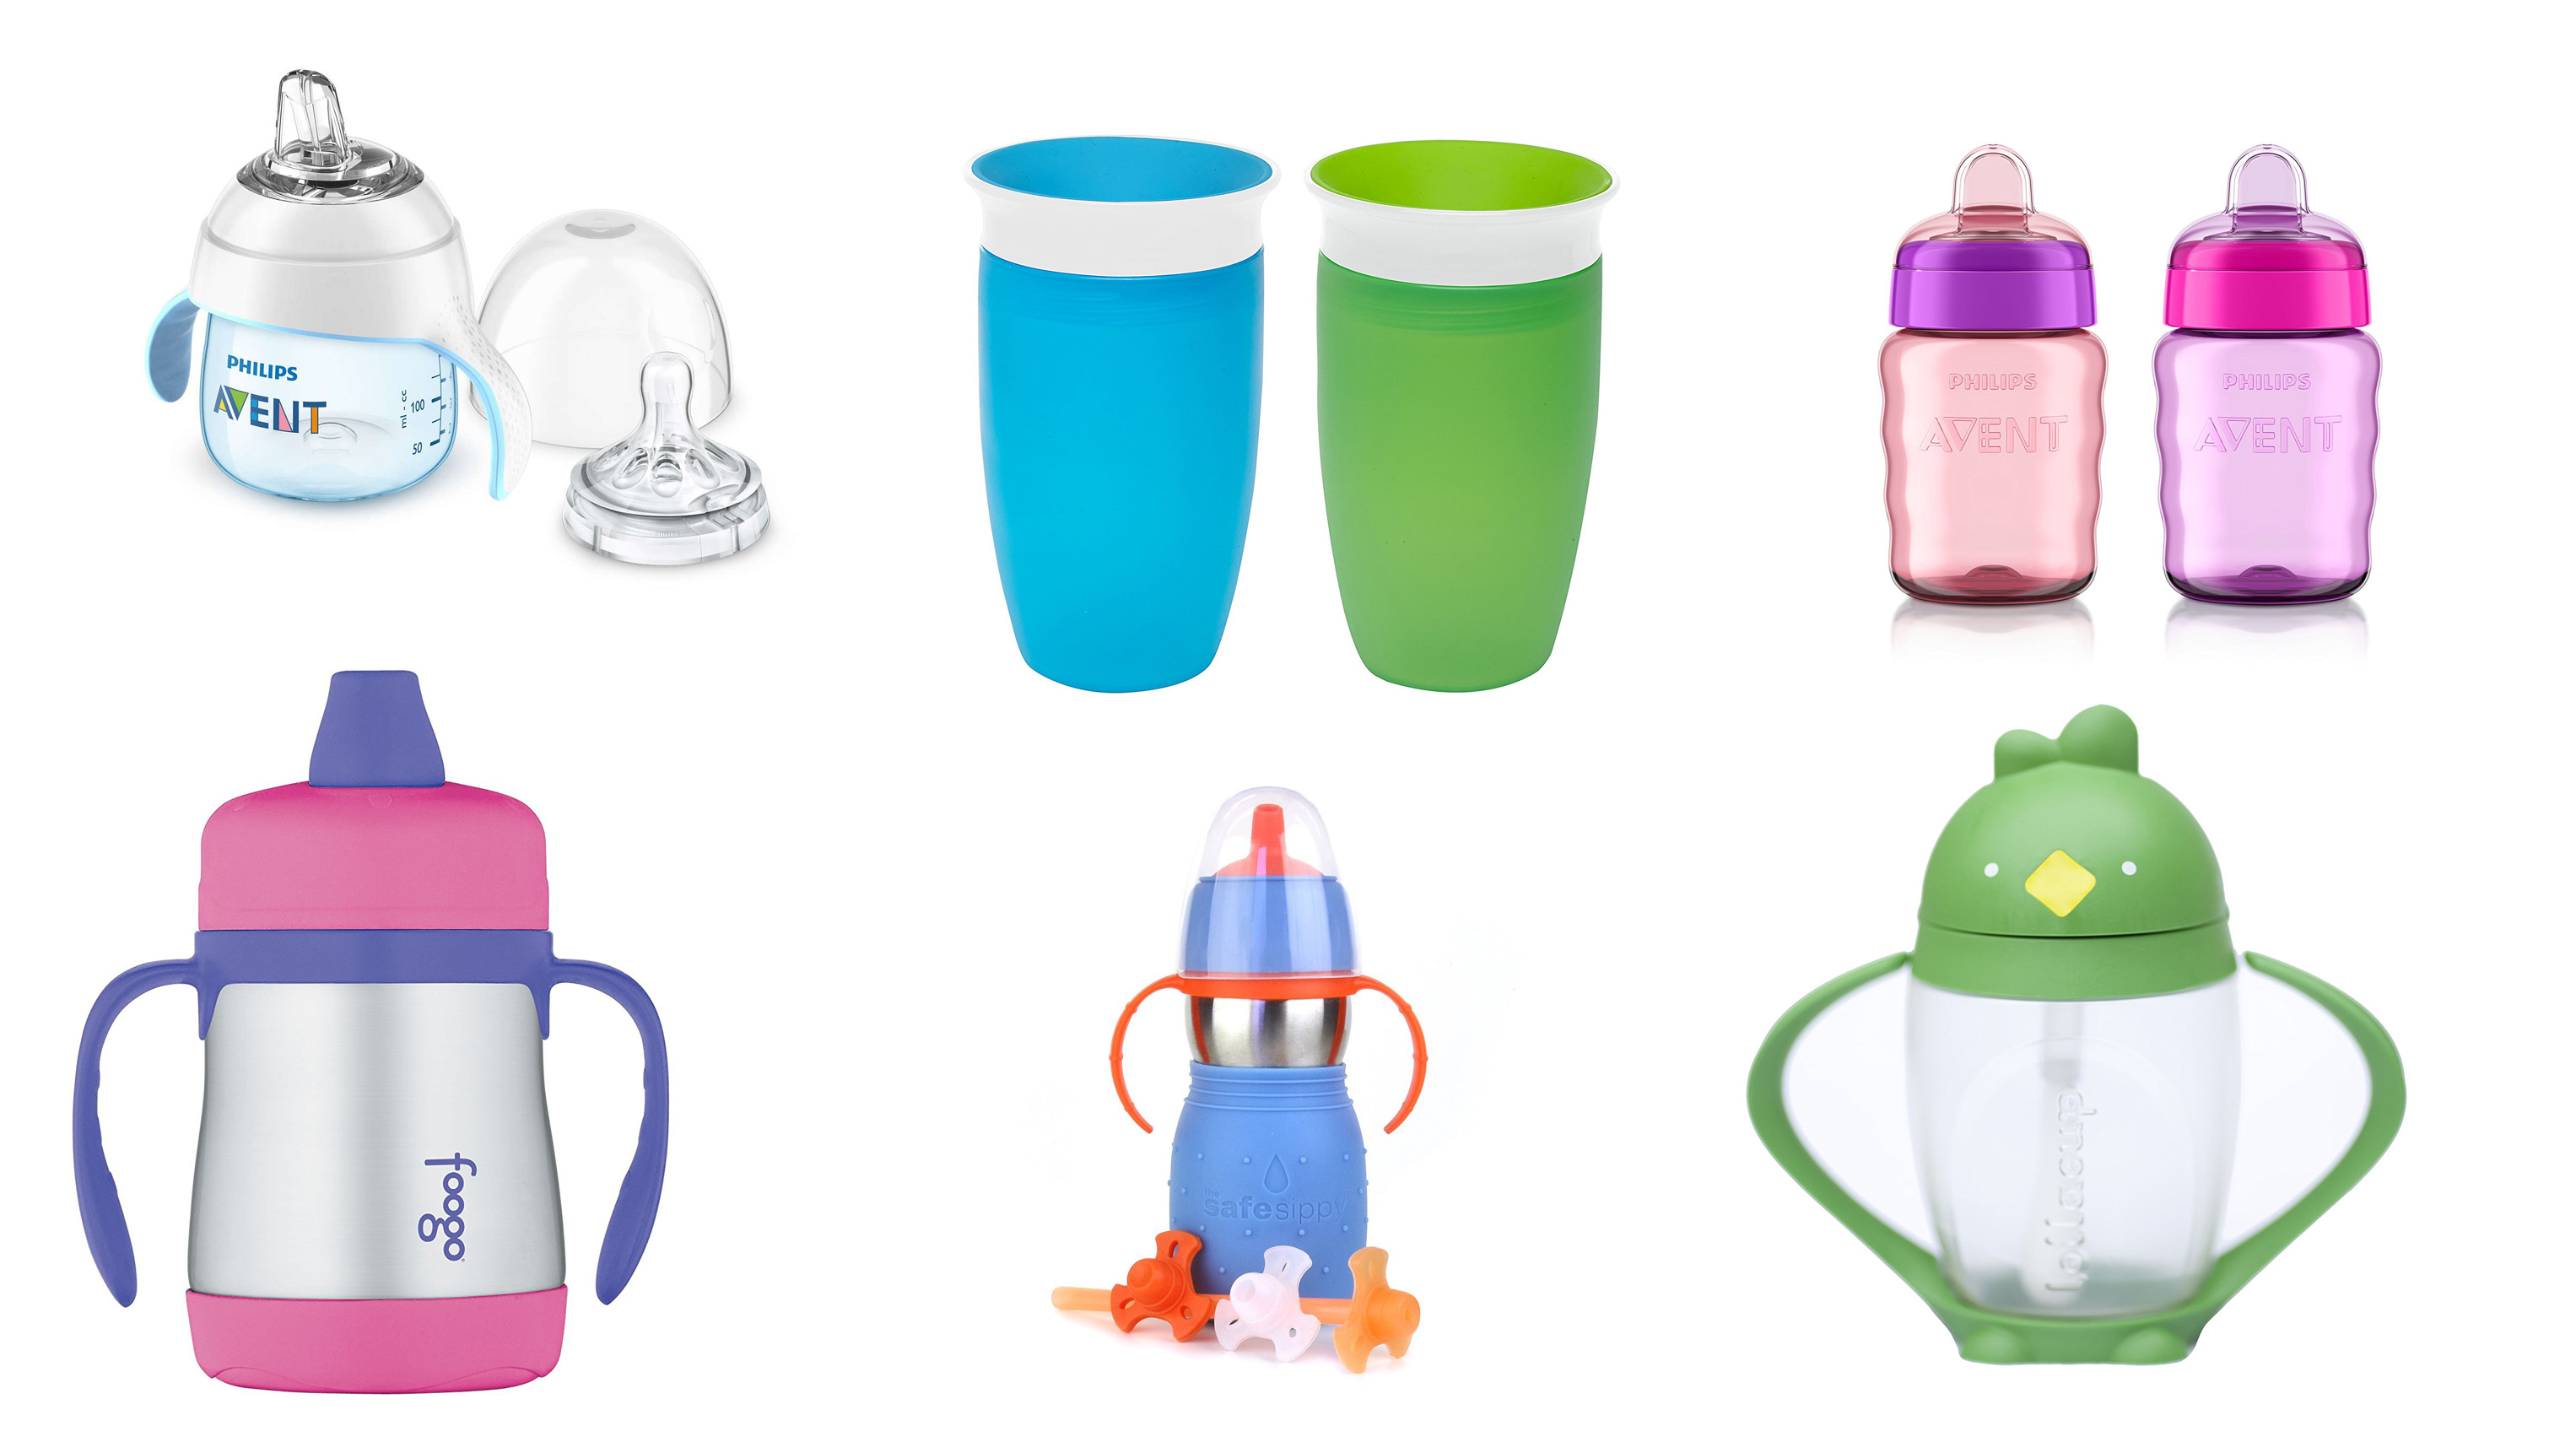 https://heavy.com/wp-content/uploads/2017/07/best-bpa-free-sippy-cups.jpg?quality=65&strip=all